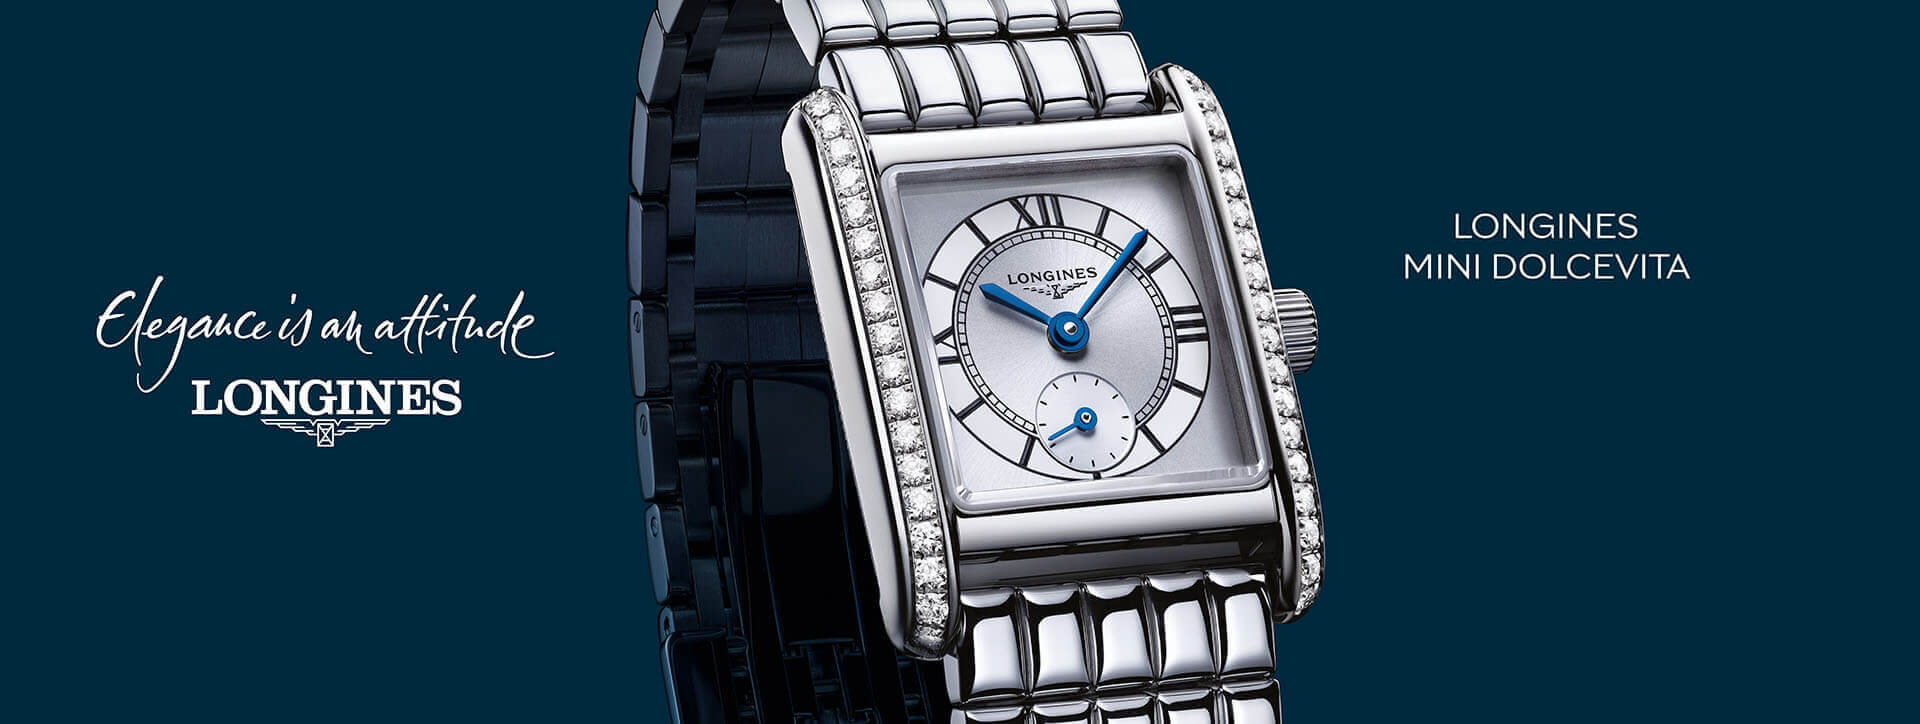 Longines watches - shop now